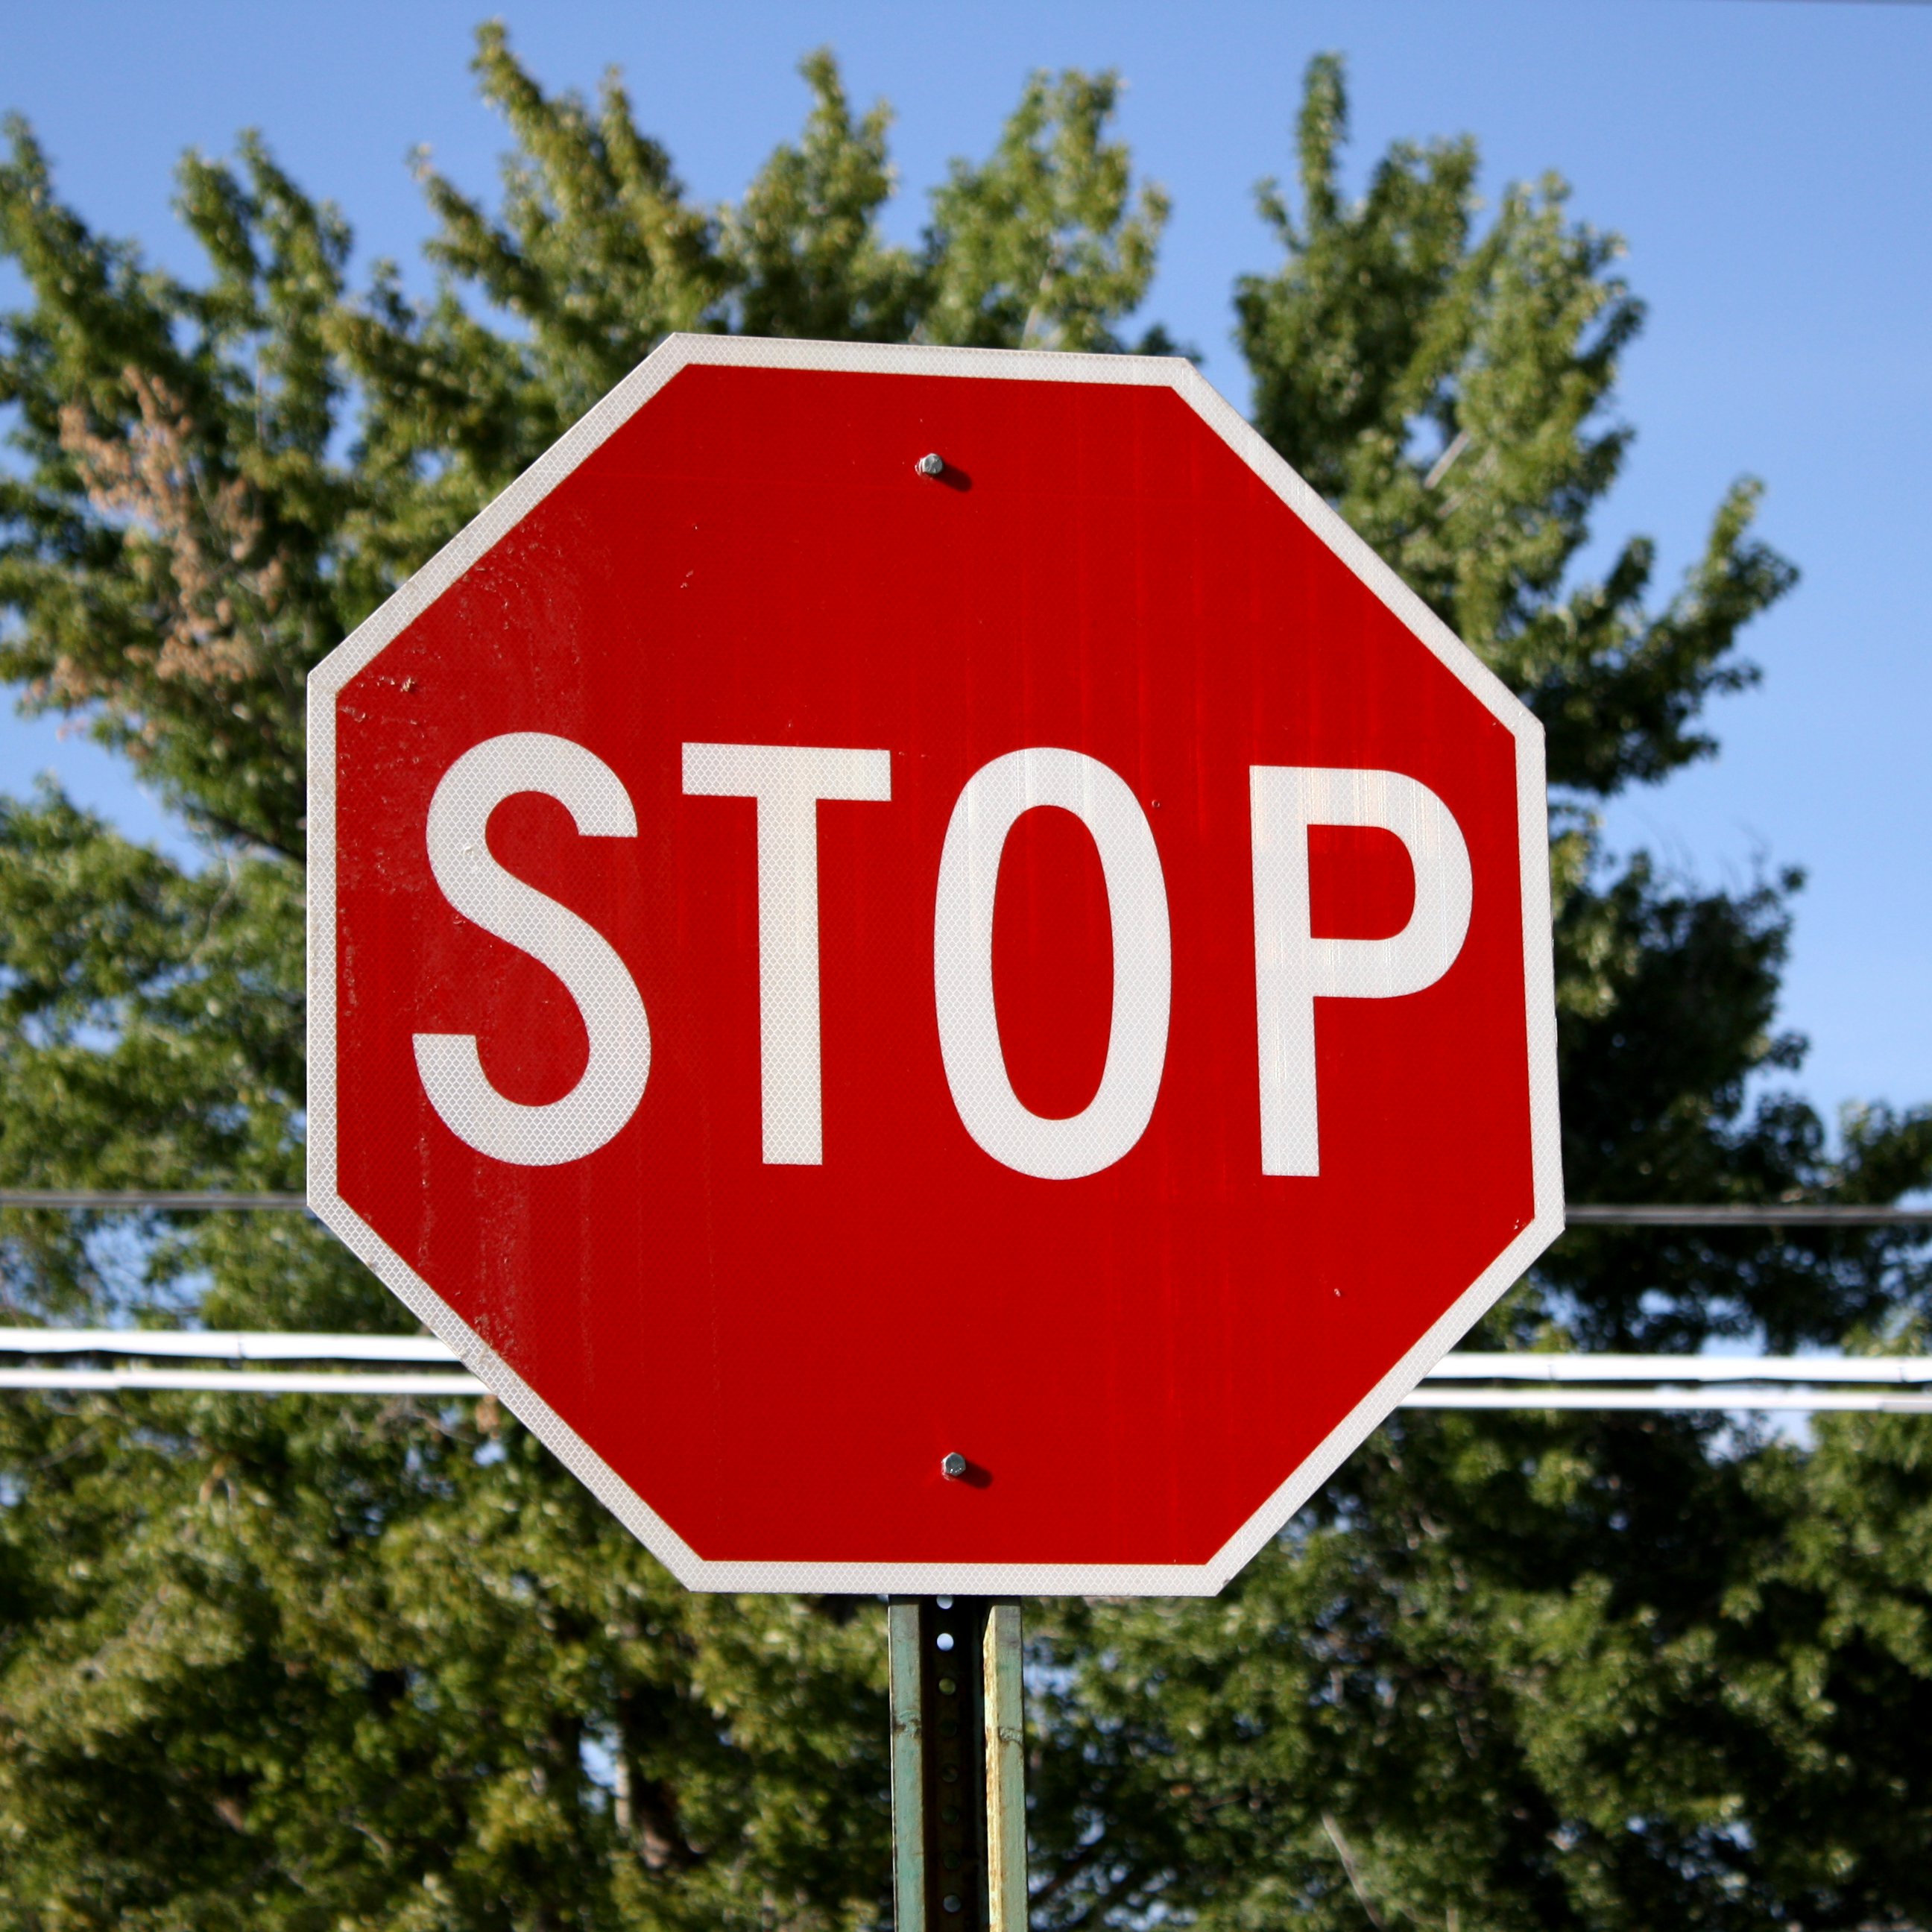 What Does A Stop Sign Symbolize